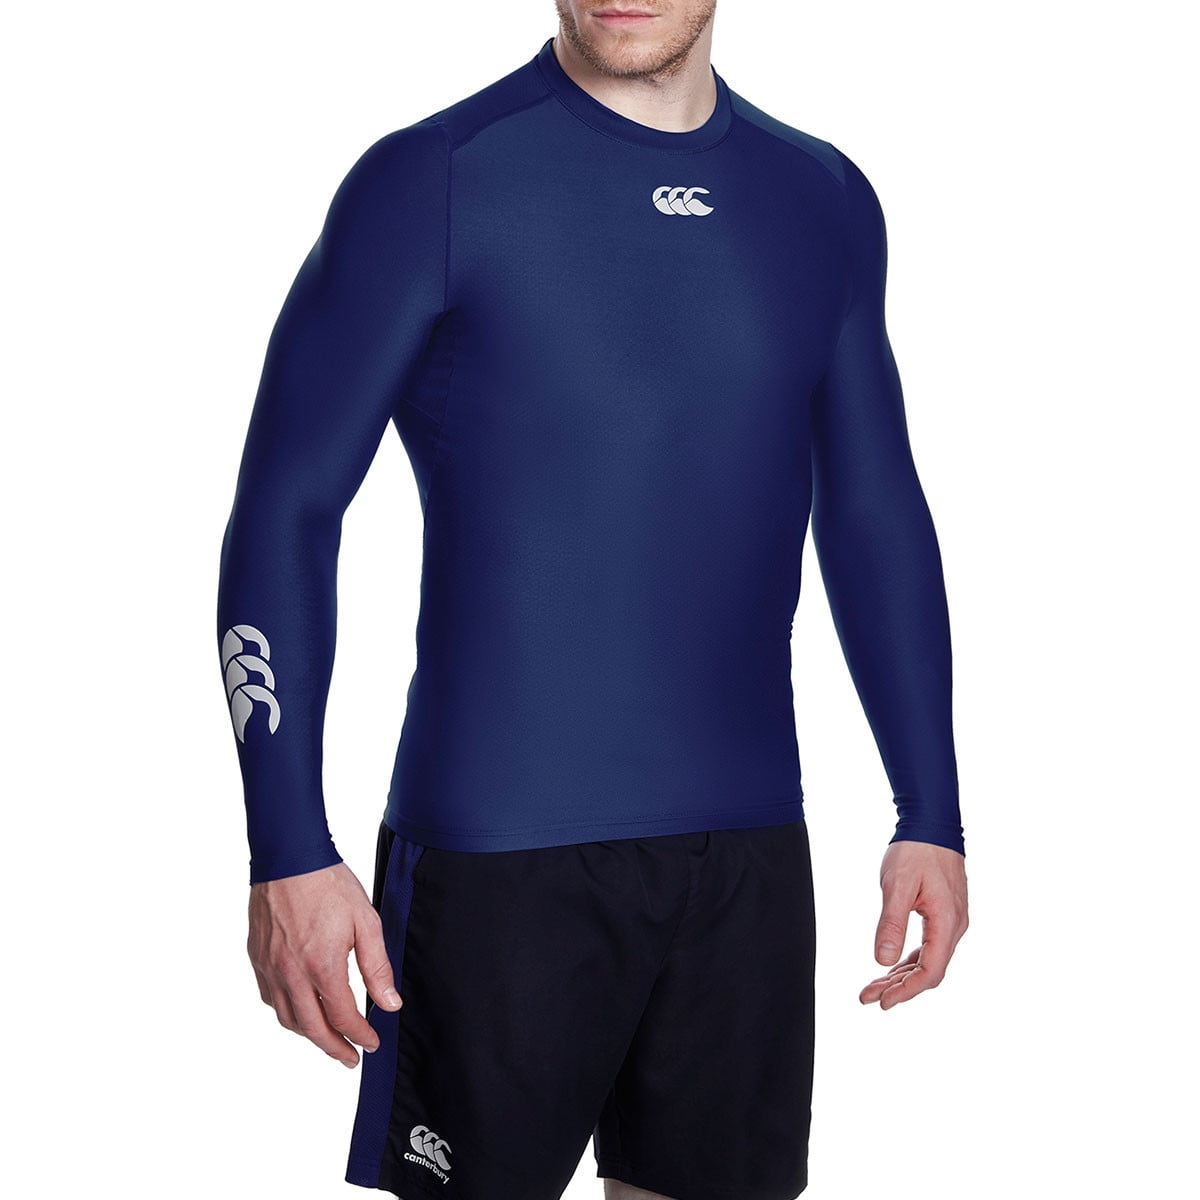 Canterbury Mens Cold Turtle Neck Sports Training Baselayer Compression Top White